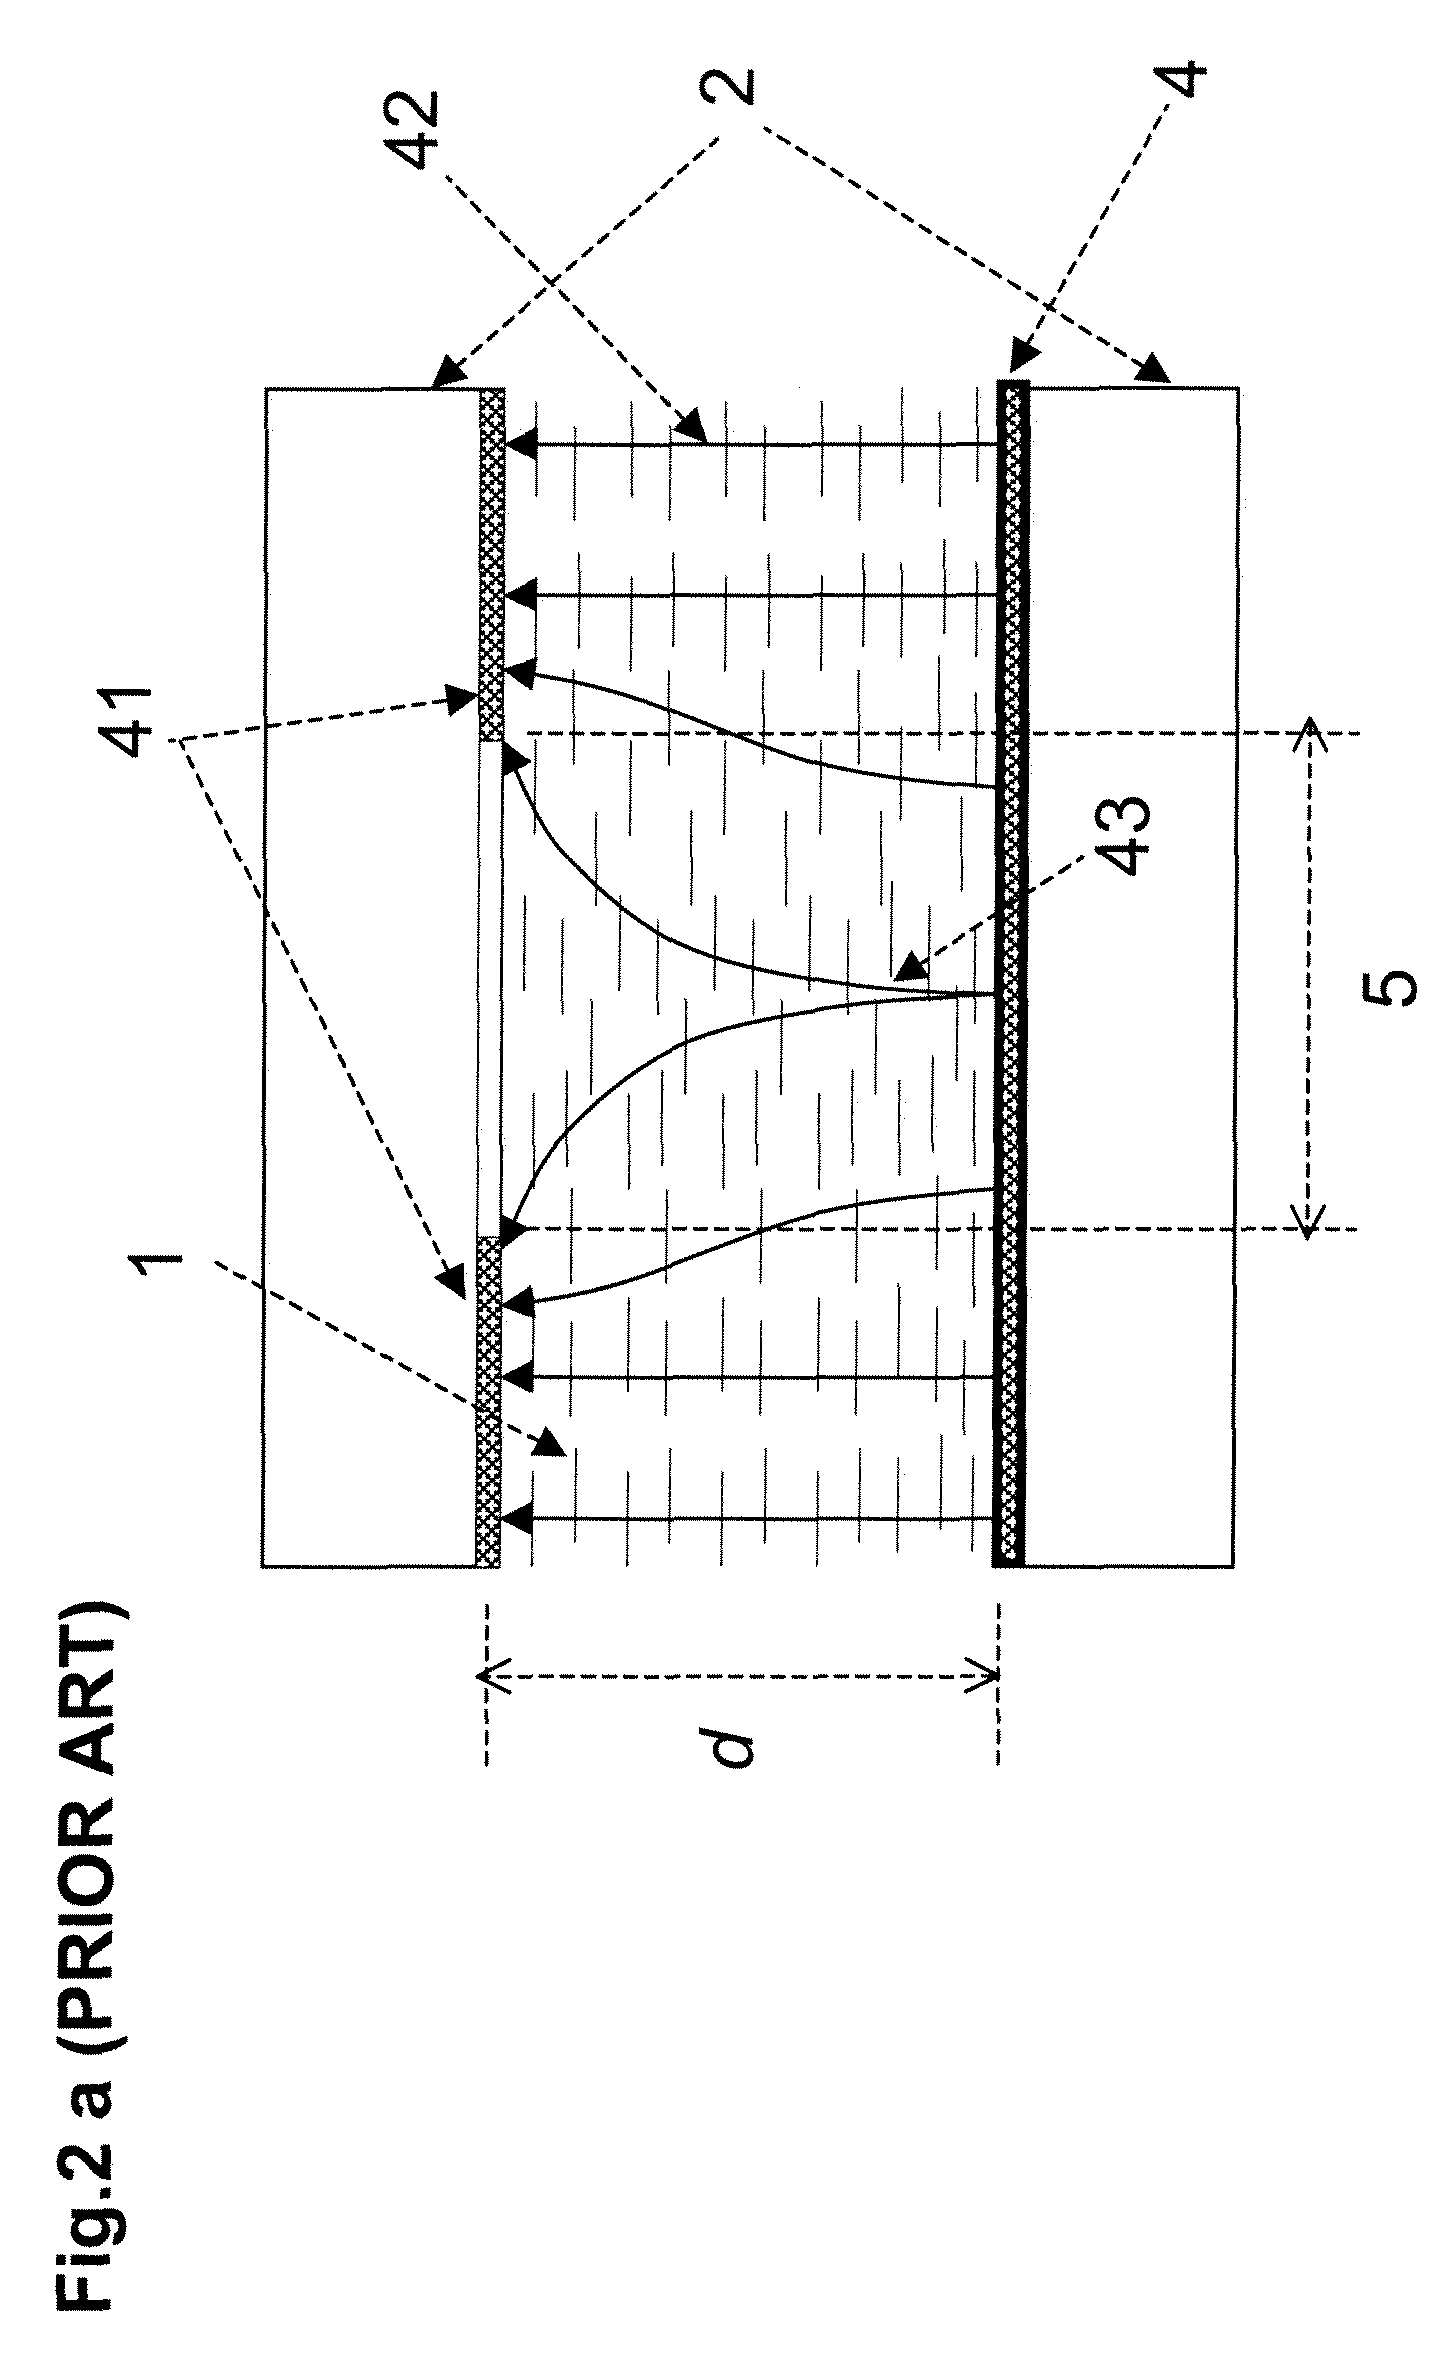 Method and apparatus for spatially modulated electric field generation and electro-optical tuning using liquid crystals